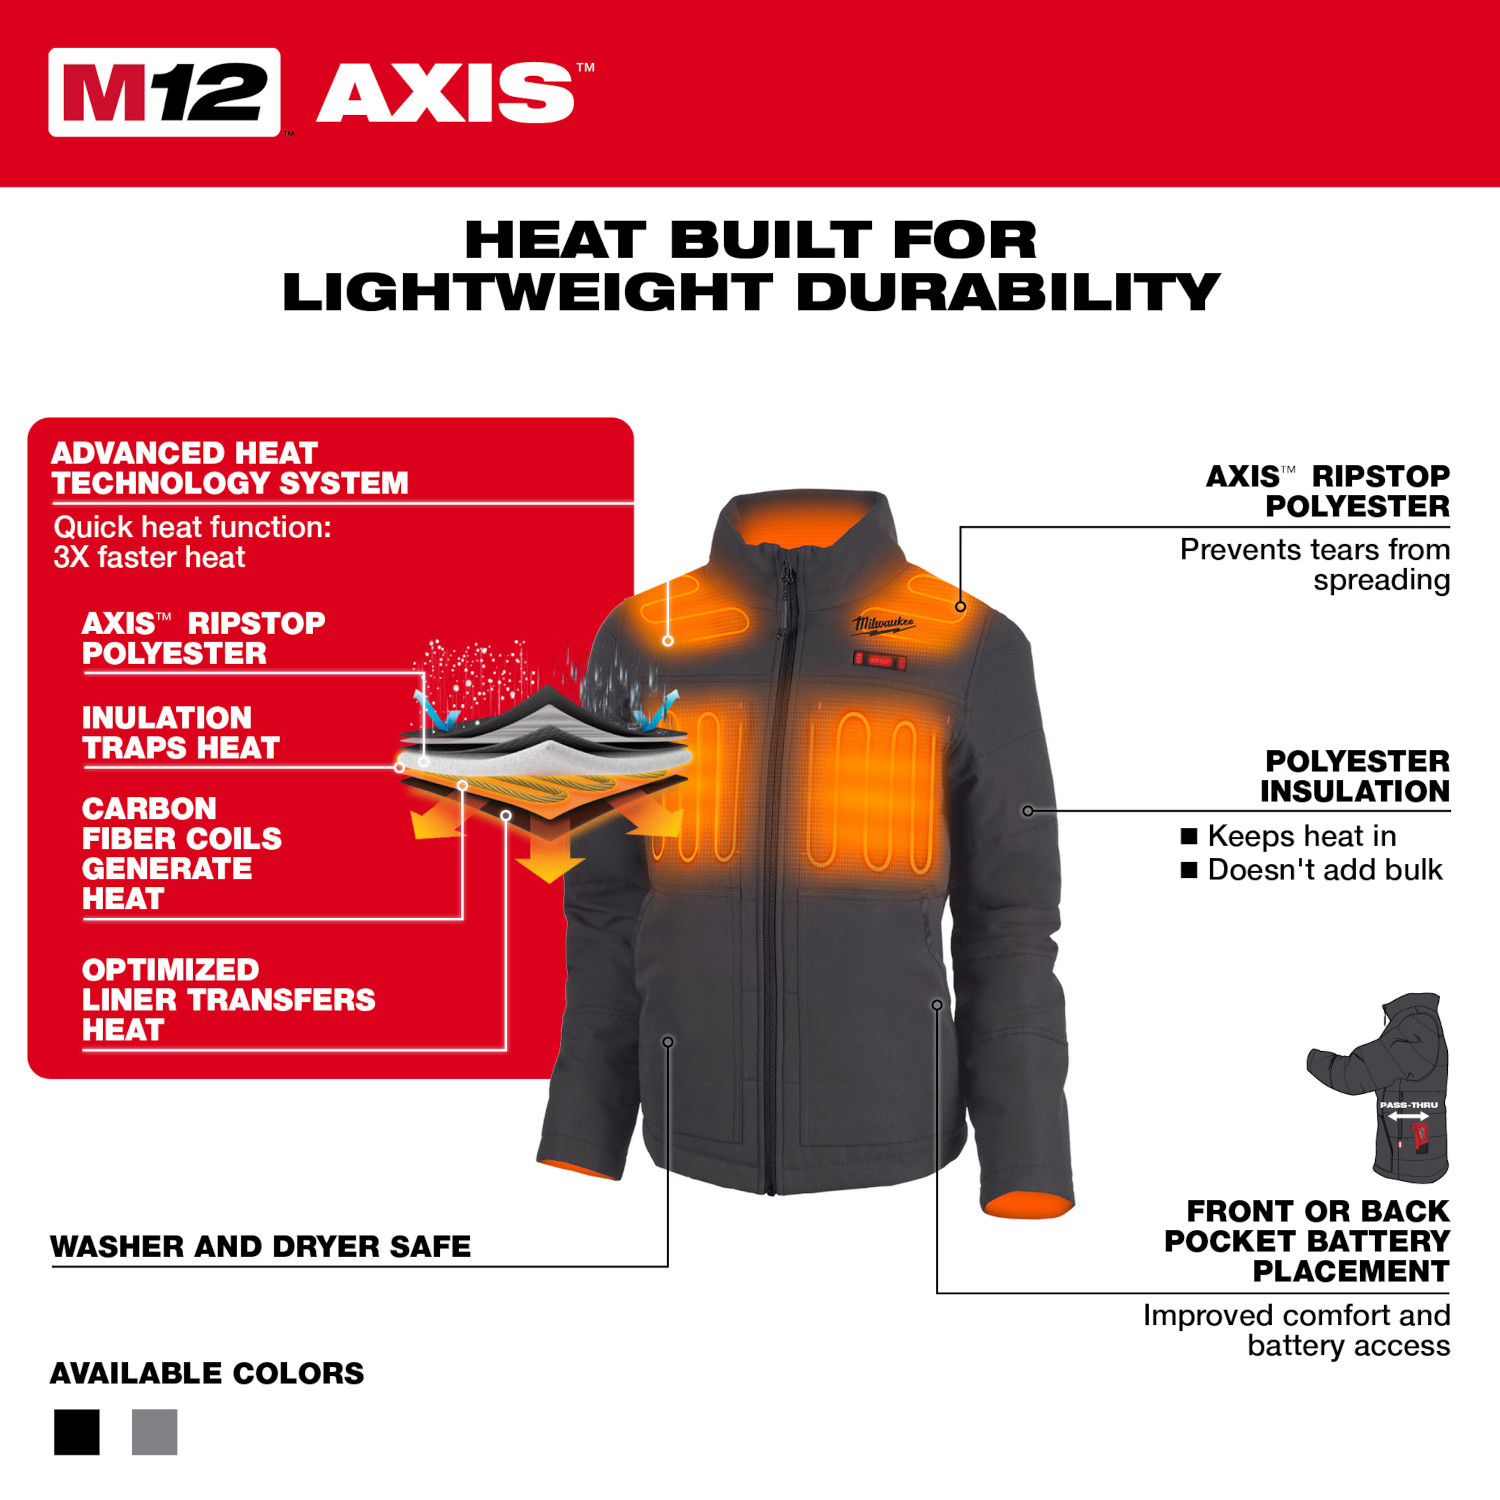 Milwaukee M12 Women's Black Heated AXIS Jacket Kit from Columbia Safety